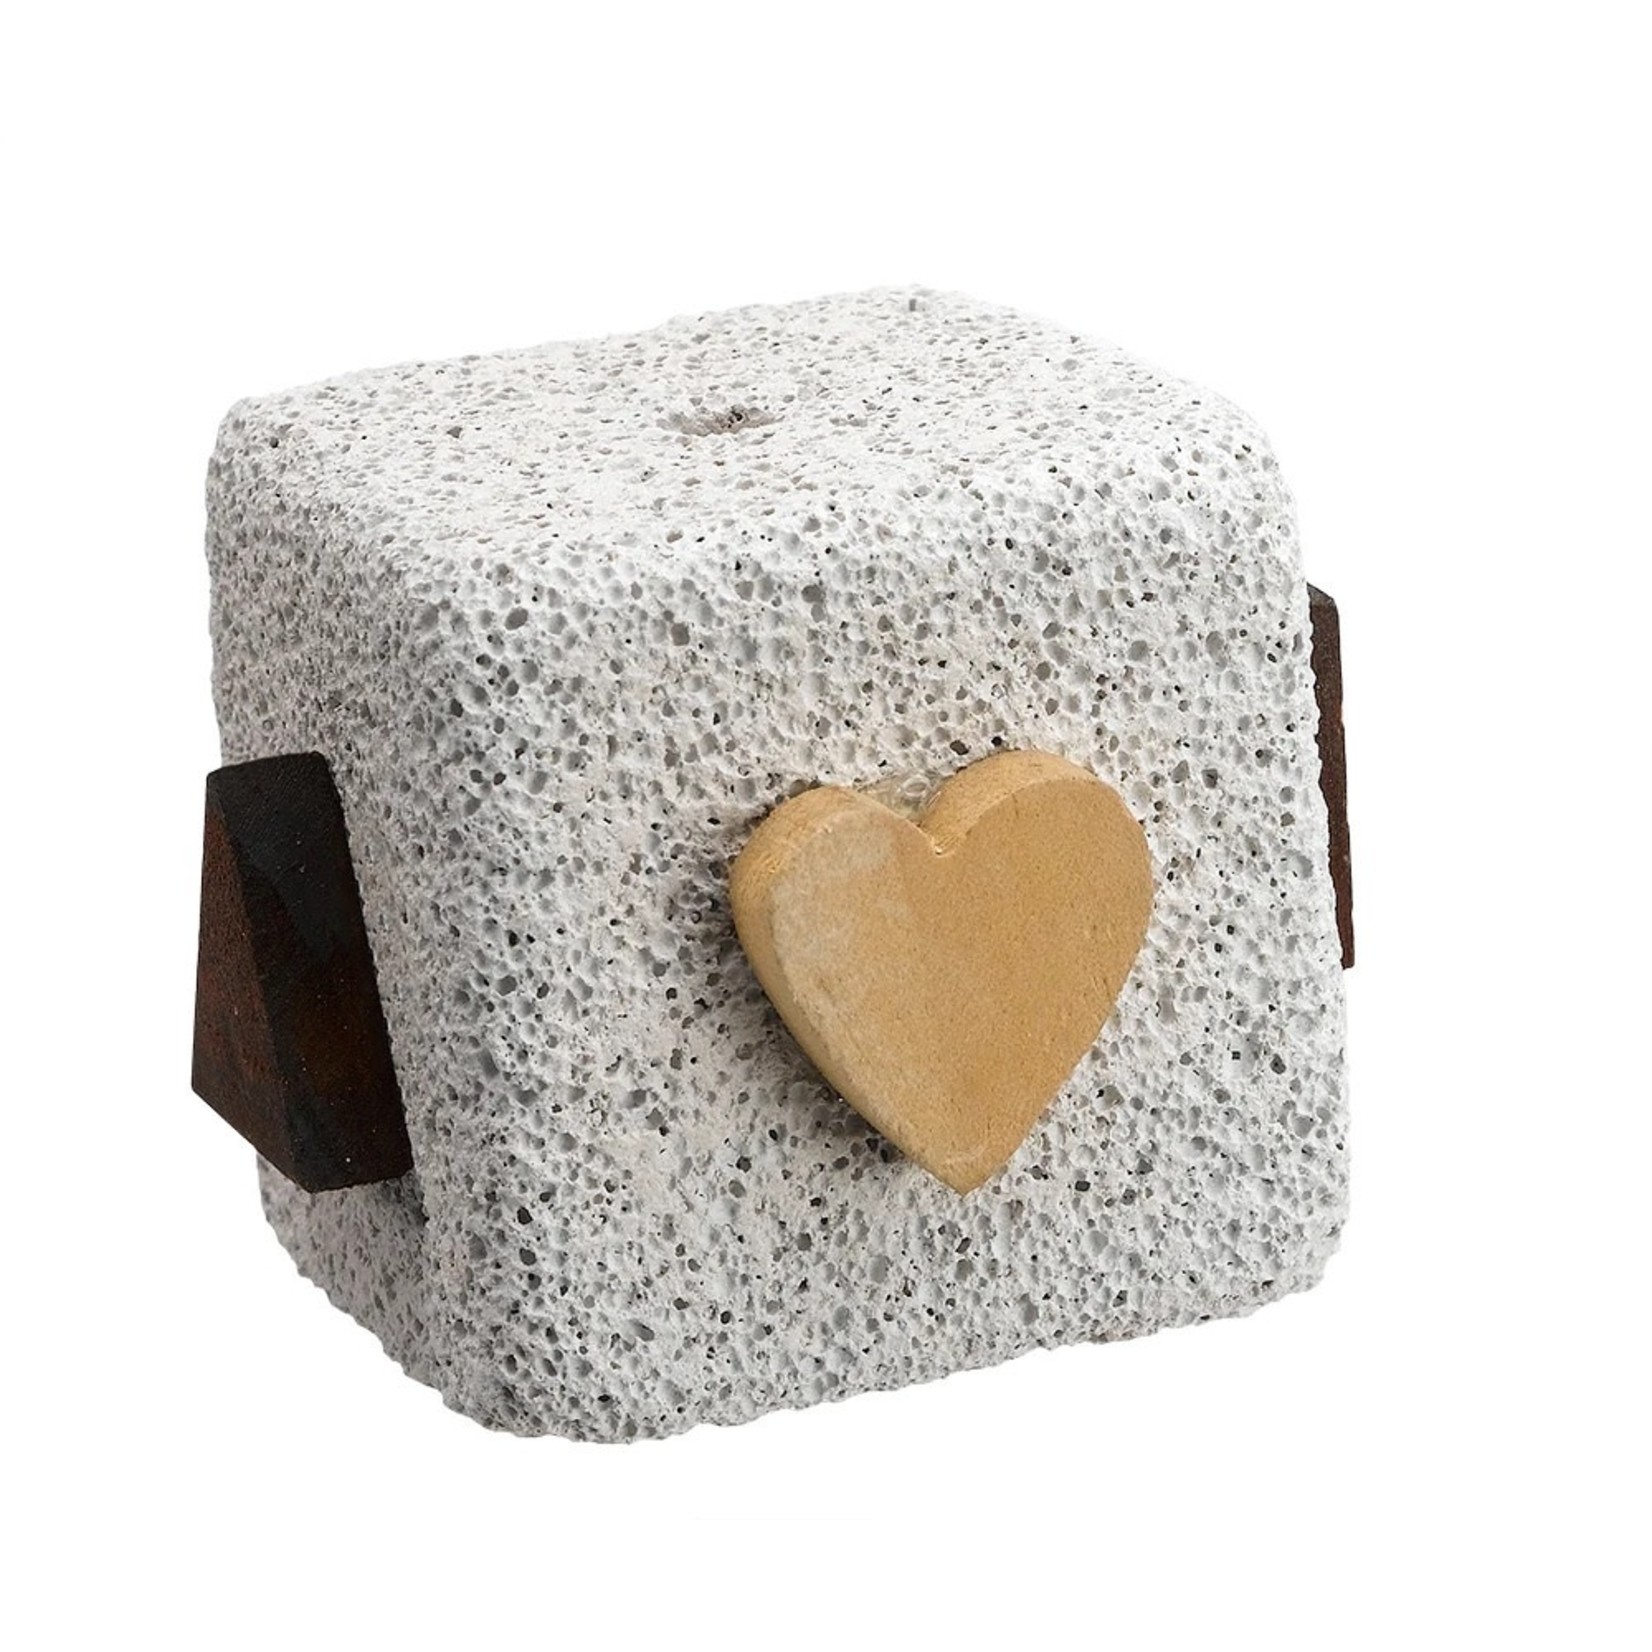 Volcanic Nibble Toy for Small Animals, 6 x 6 x 4.5cm